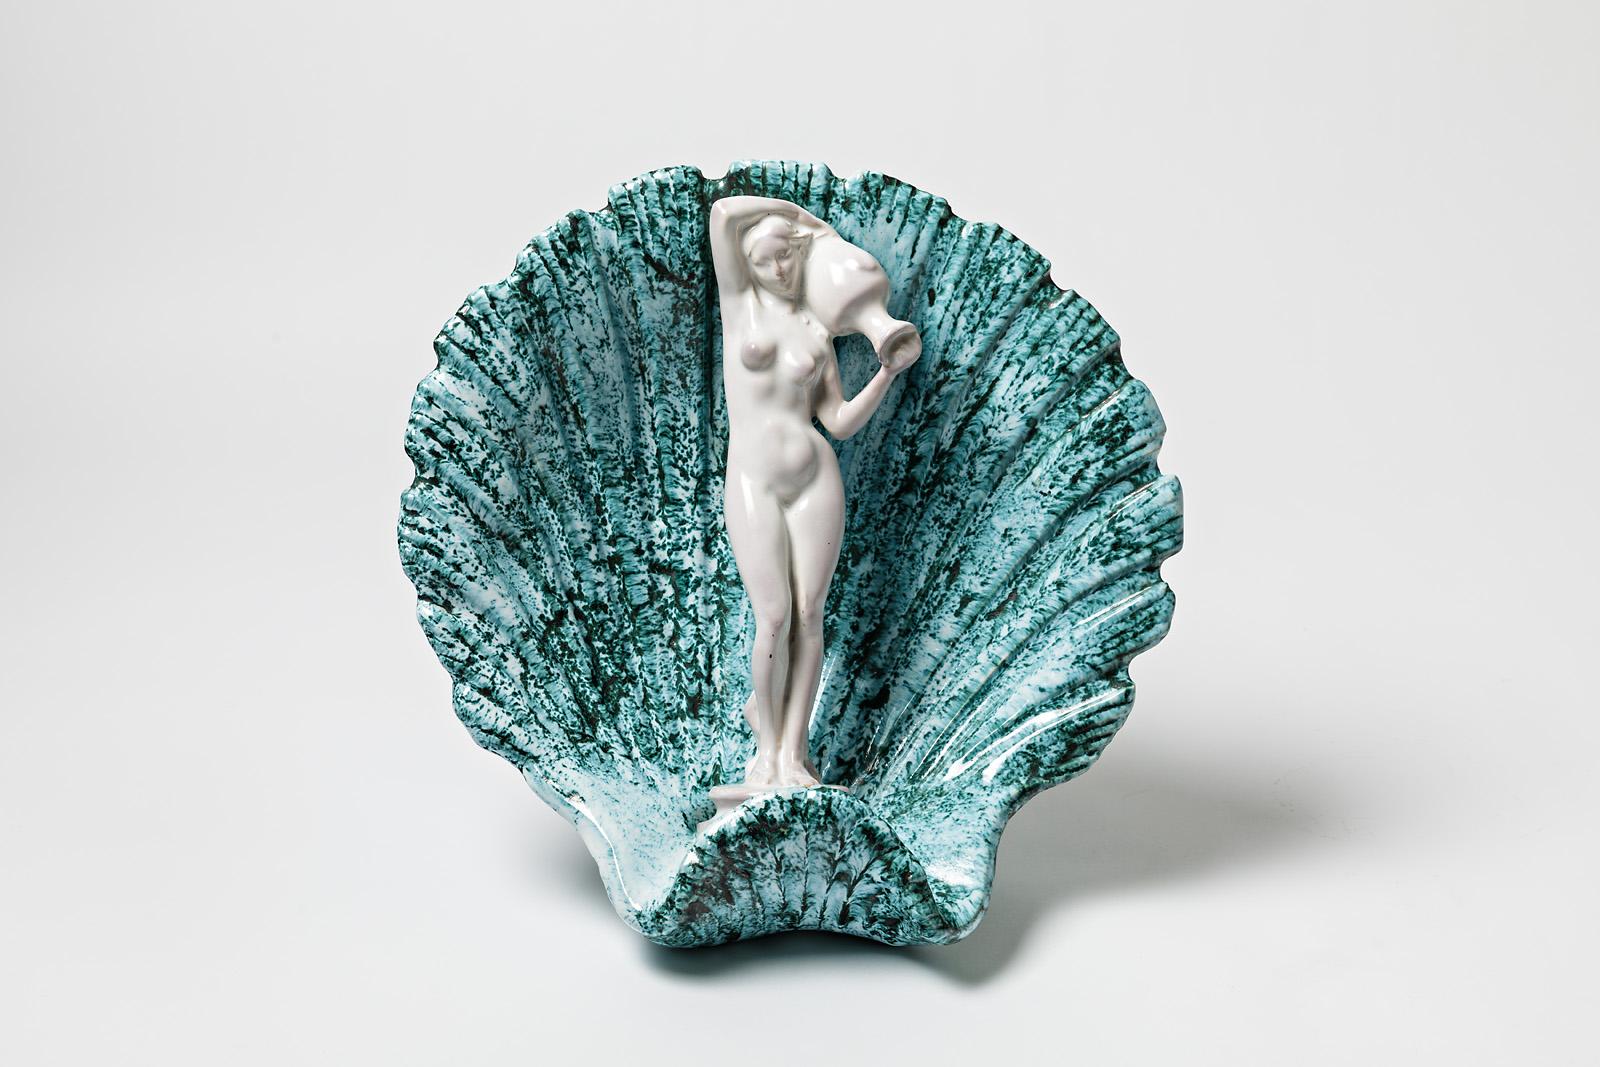 French Wall Ceramic Sculpture with White and Green Glazes Decoration, circa 1950-1960 For Sale